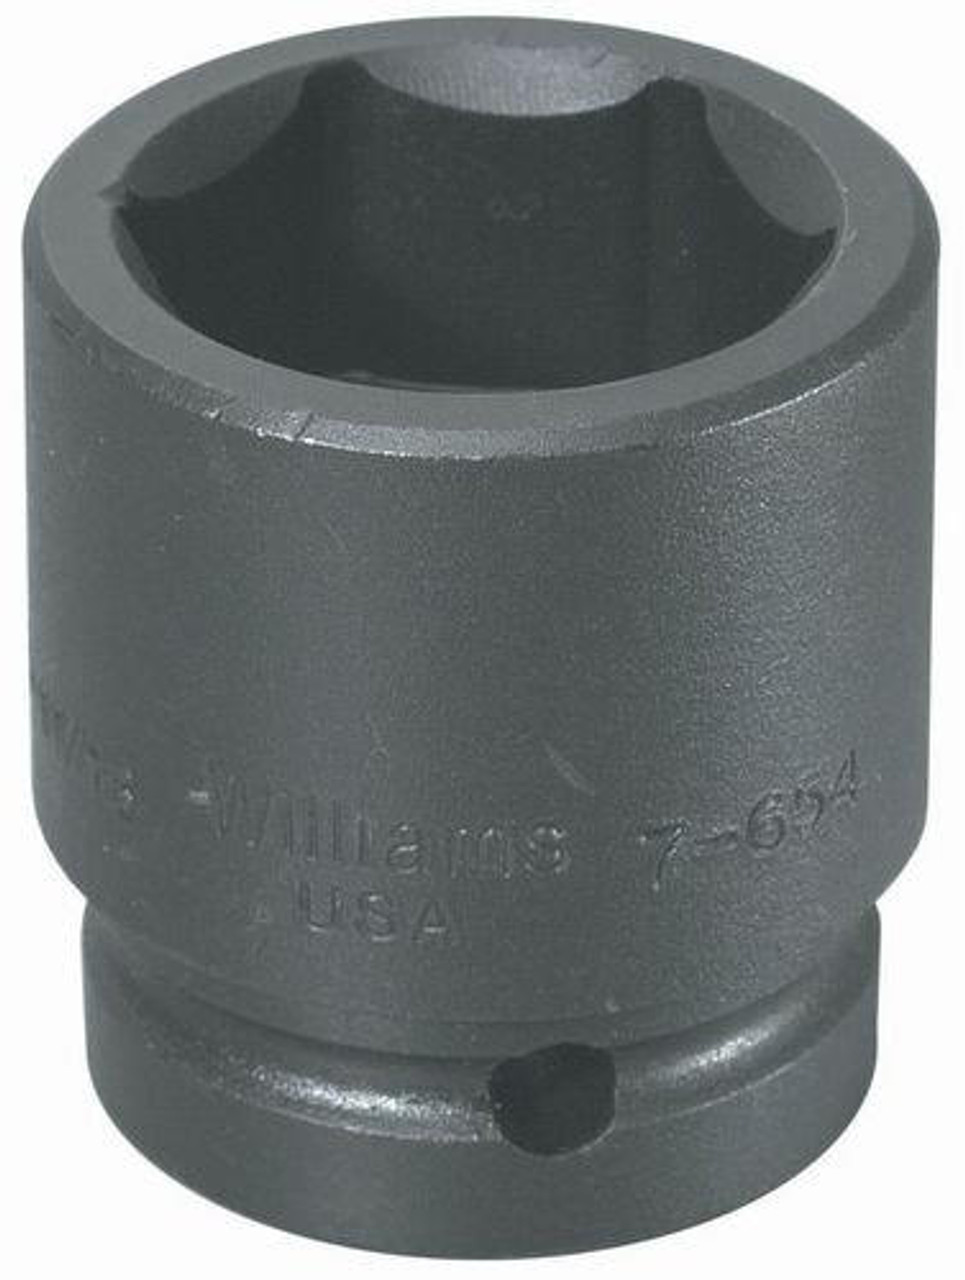 Williams Made In USA 2 13/16" Williams 1" Dr Shallow Impact Socket 6 Pt - 7-690 